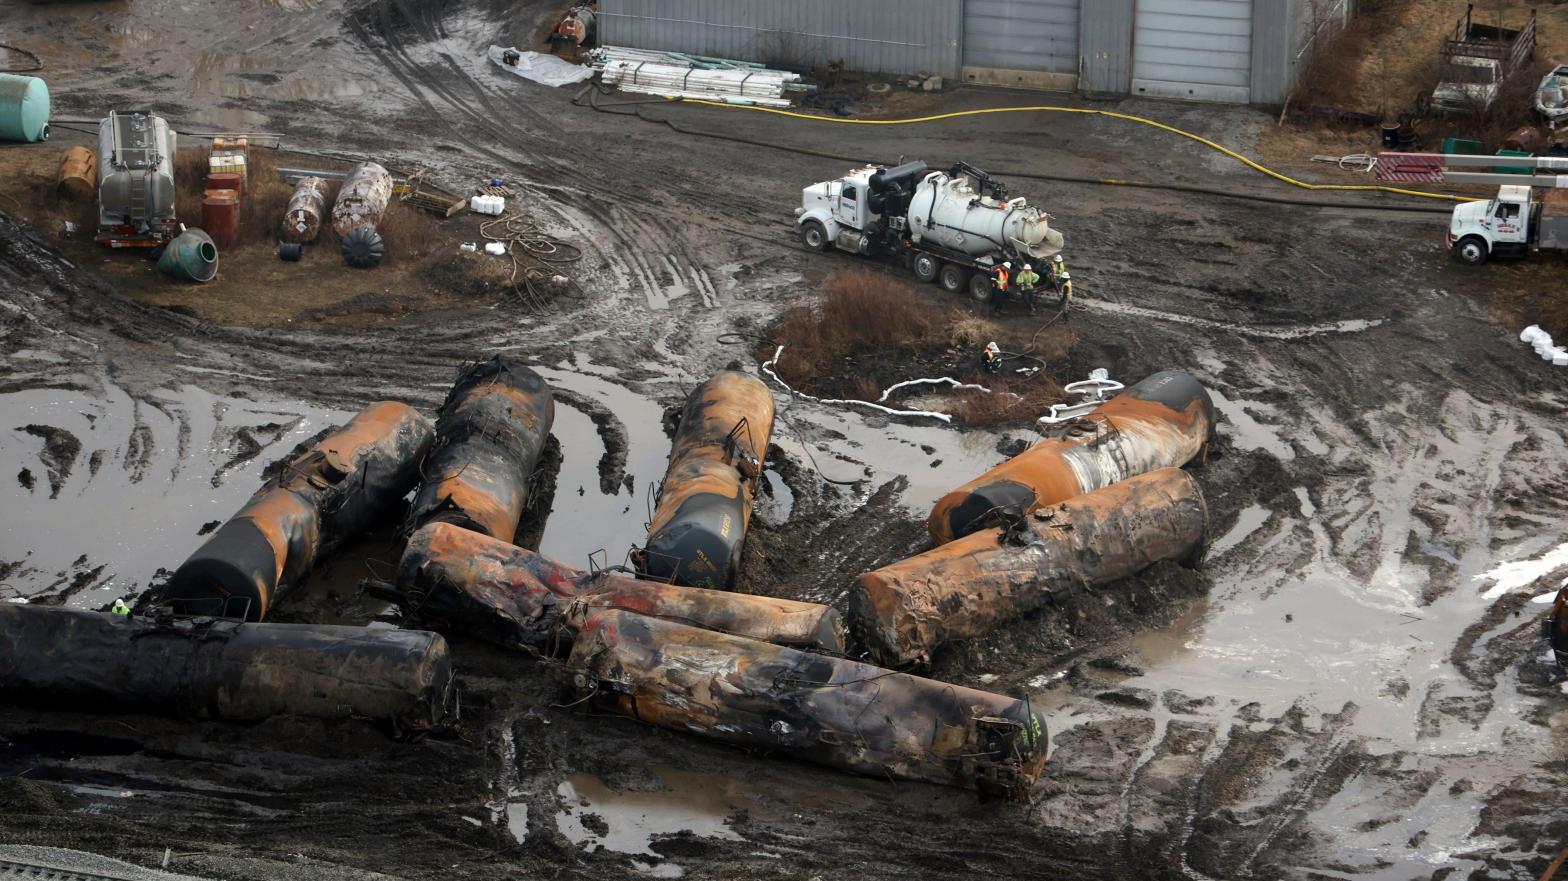 The aftermath of the derailment in East Palestine on February 8. (Photo: mpi34/MediaPunch /IPX, AP)